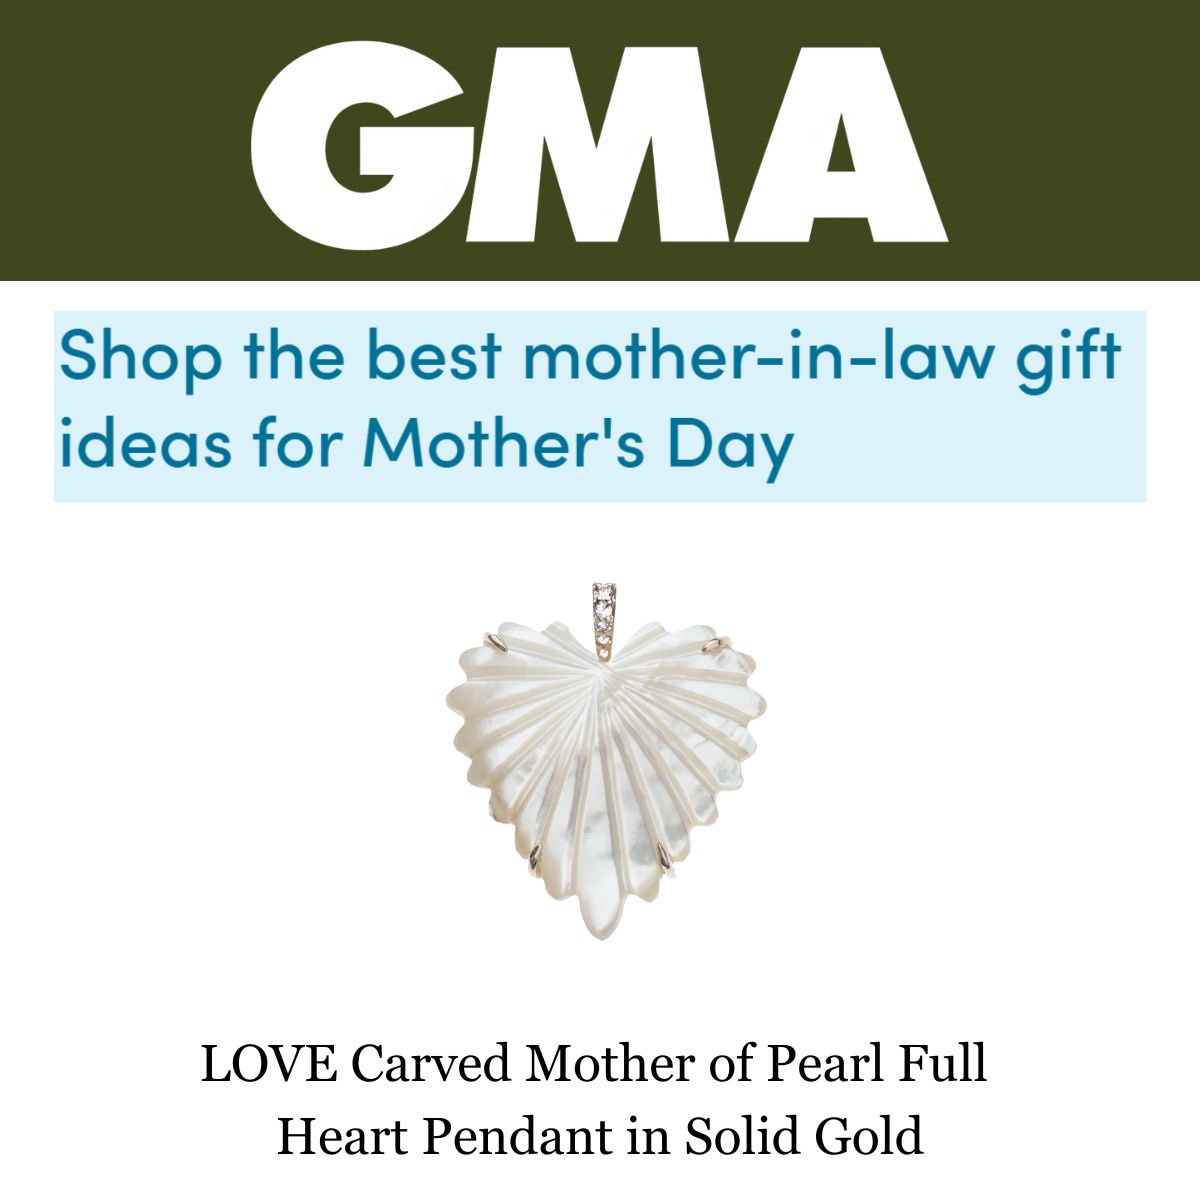 Press Highlight: GMA's "The Best Mother-In-Law Gift Ideas for Mother's Day"